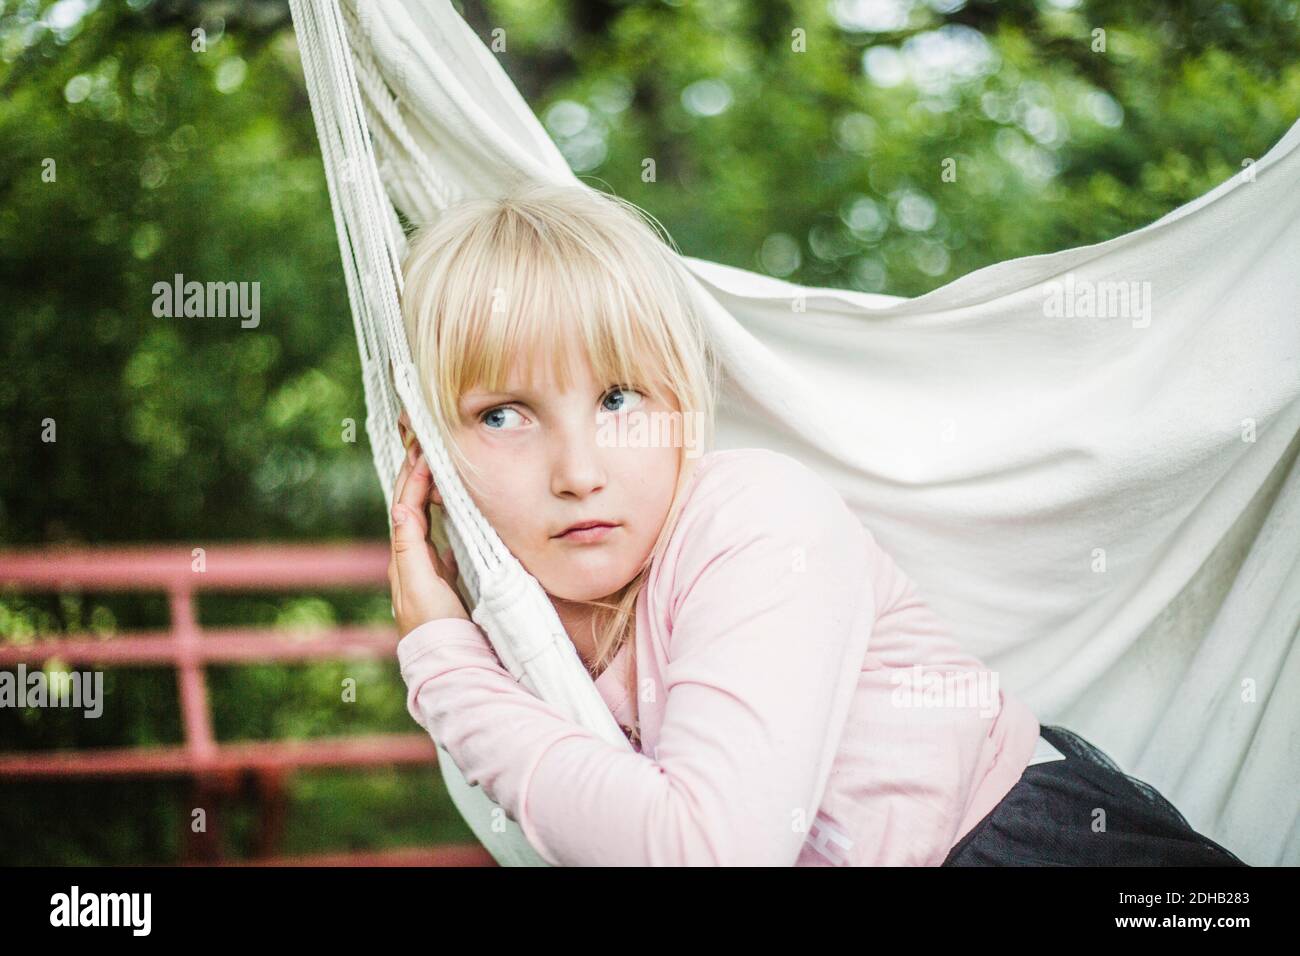 Thoughtful girl looking away while sitting on white swing in garden Stock Photo